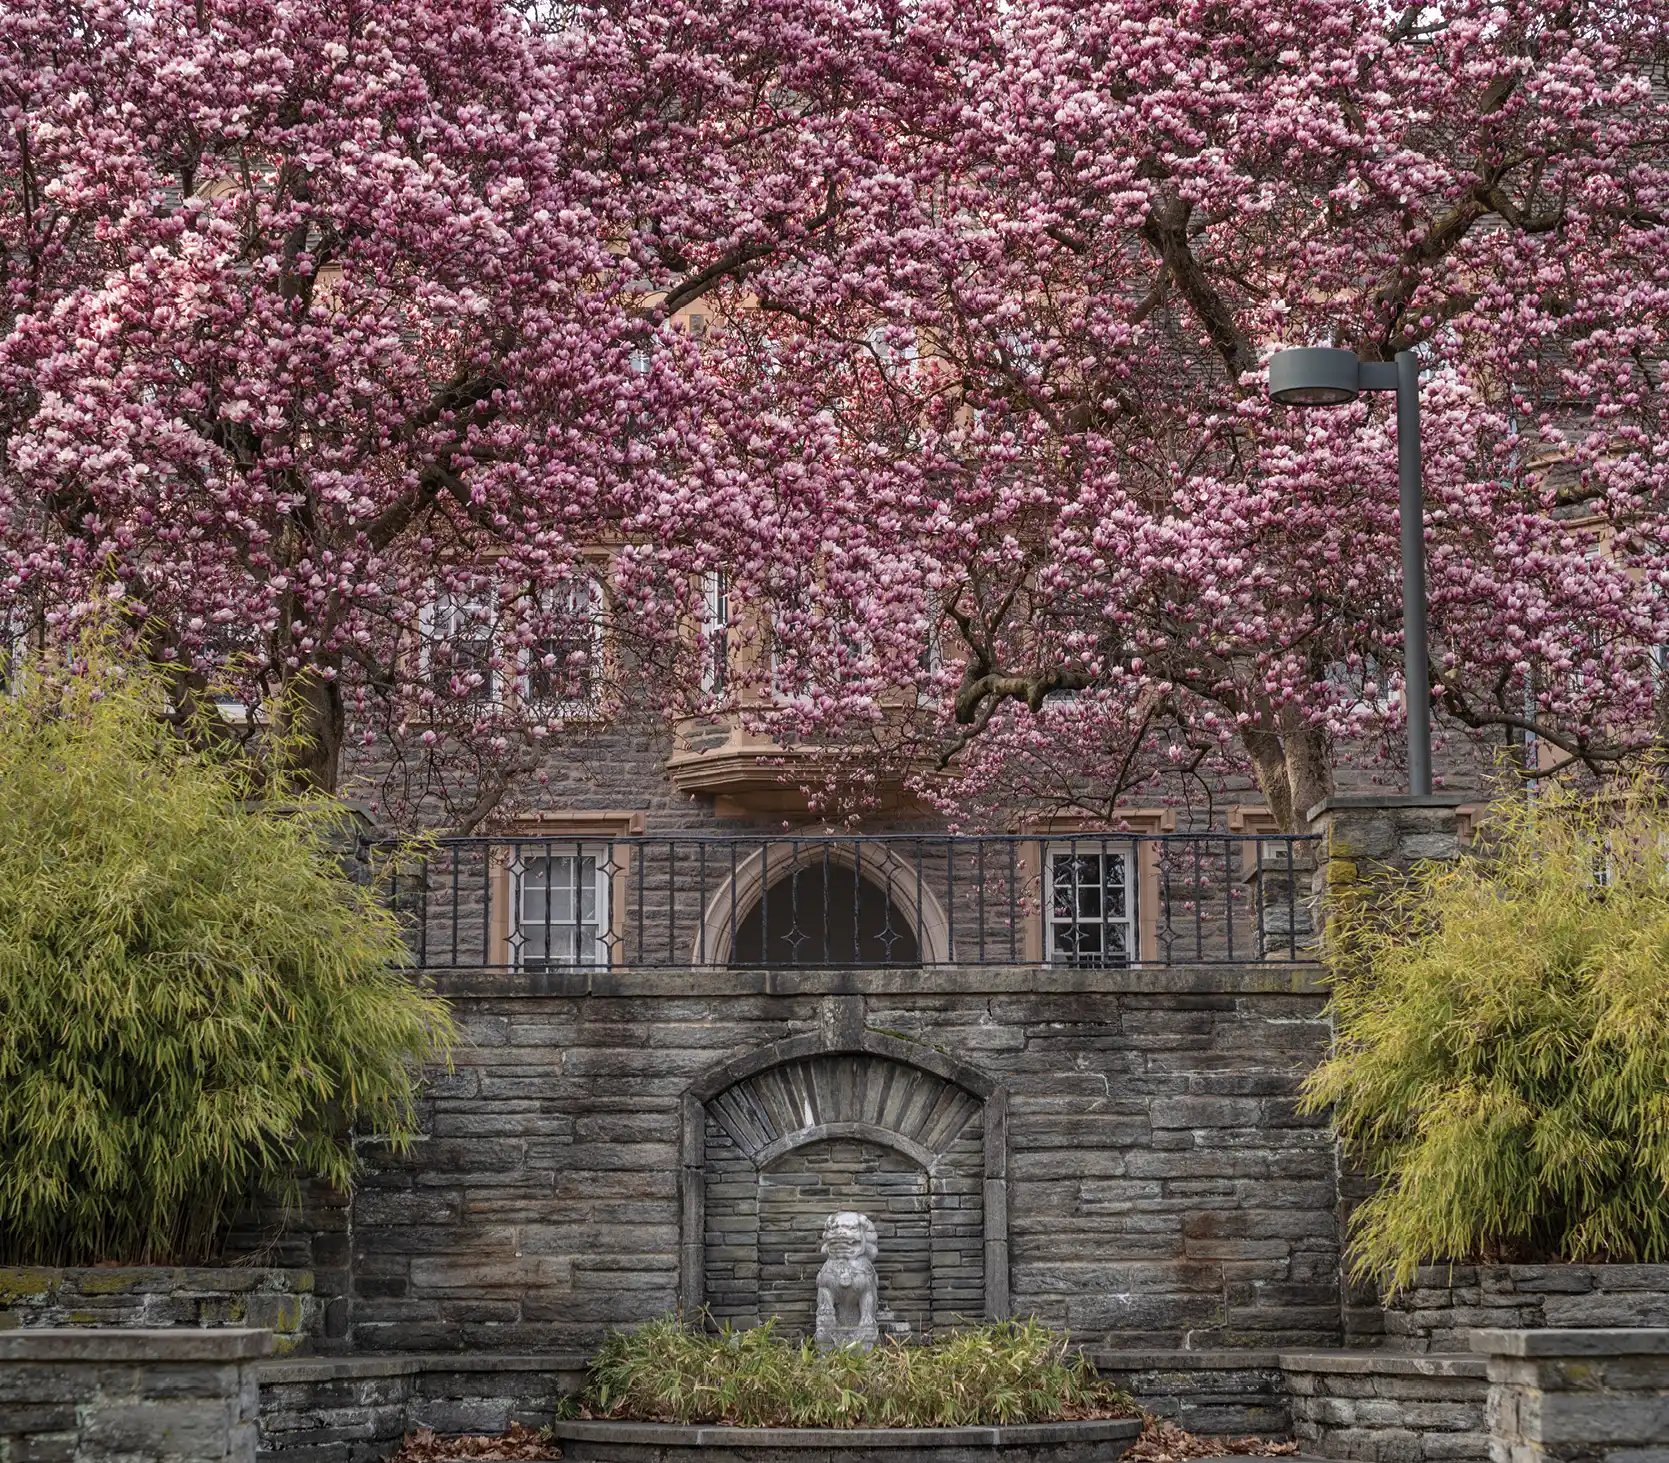 Pink flowers blooming in front of Swarthmore building